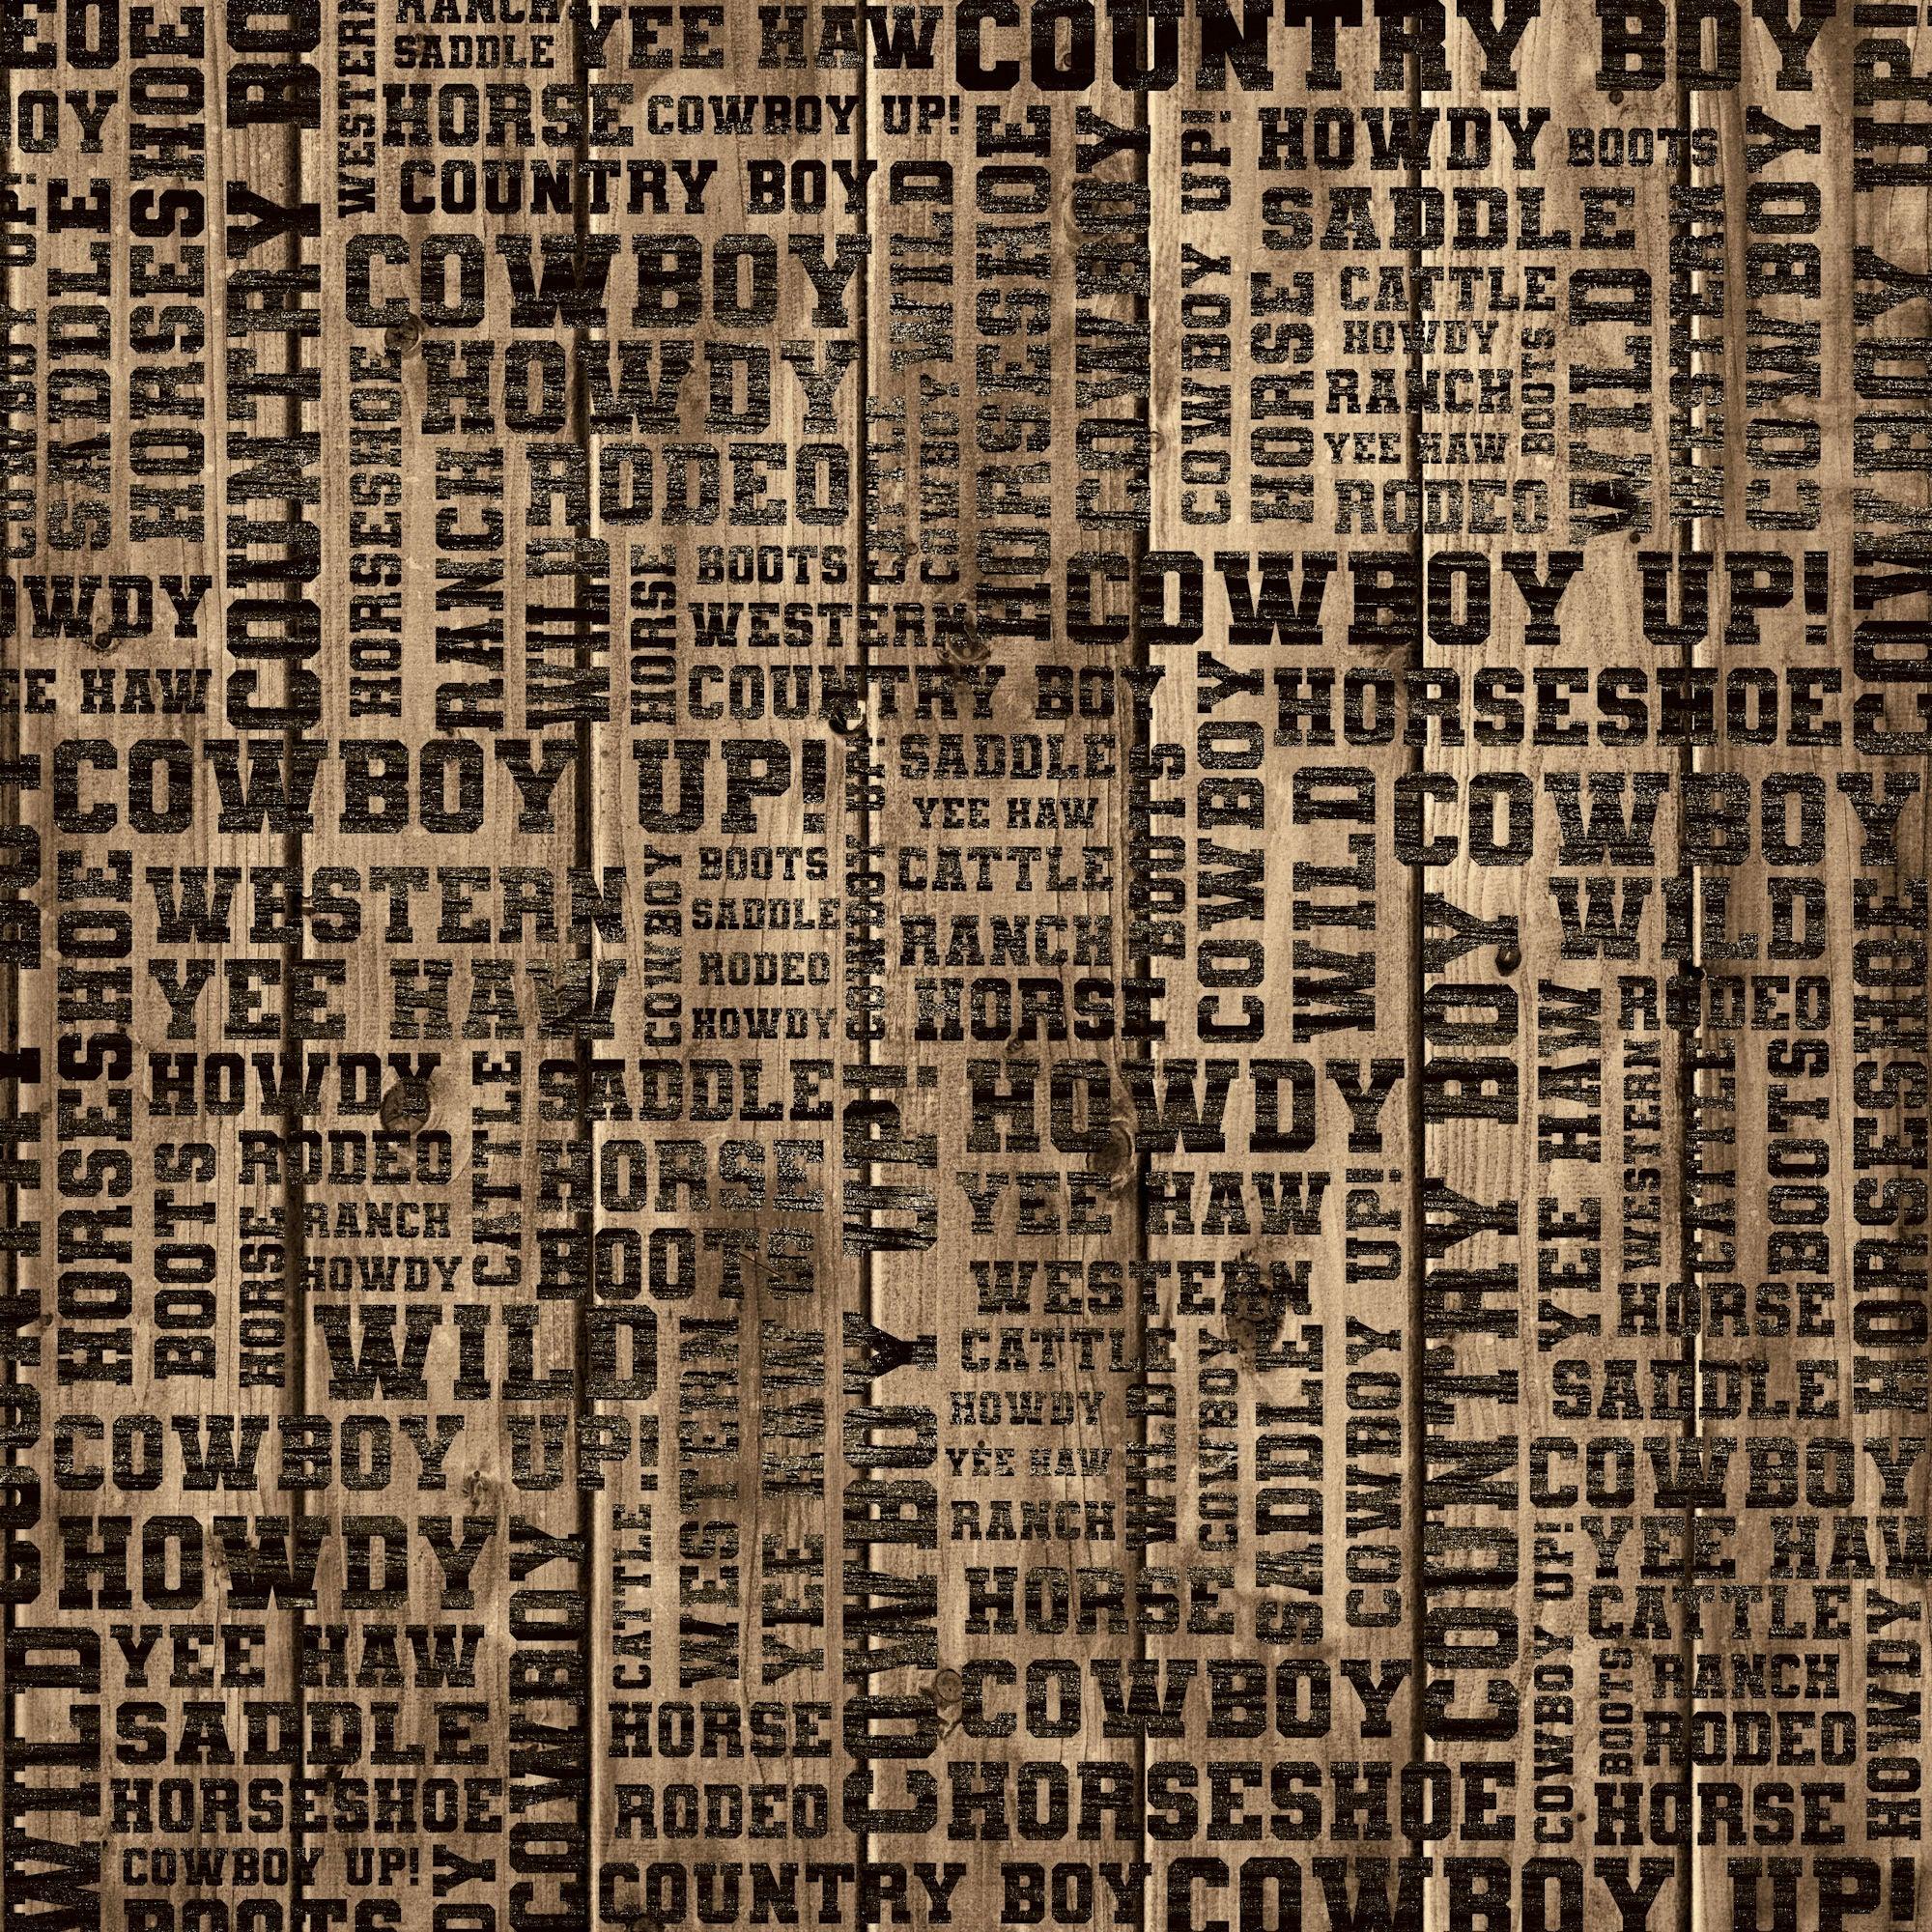 Cowboys Collection Saddle Up 12 x 12 Double-Sided Scrapbook Paper by SSC Designs